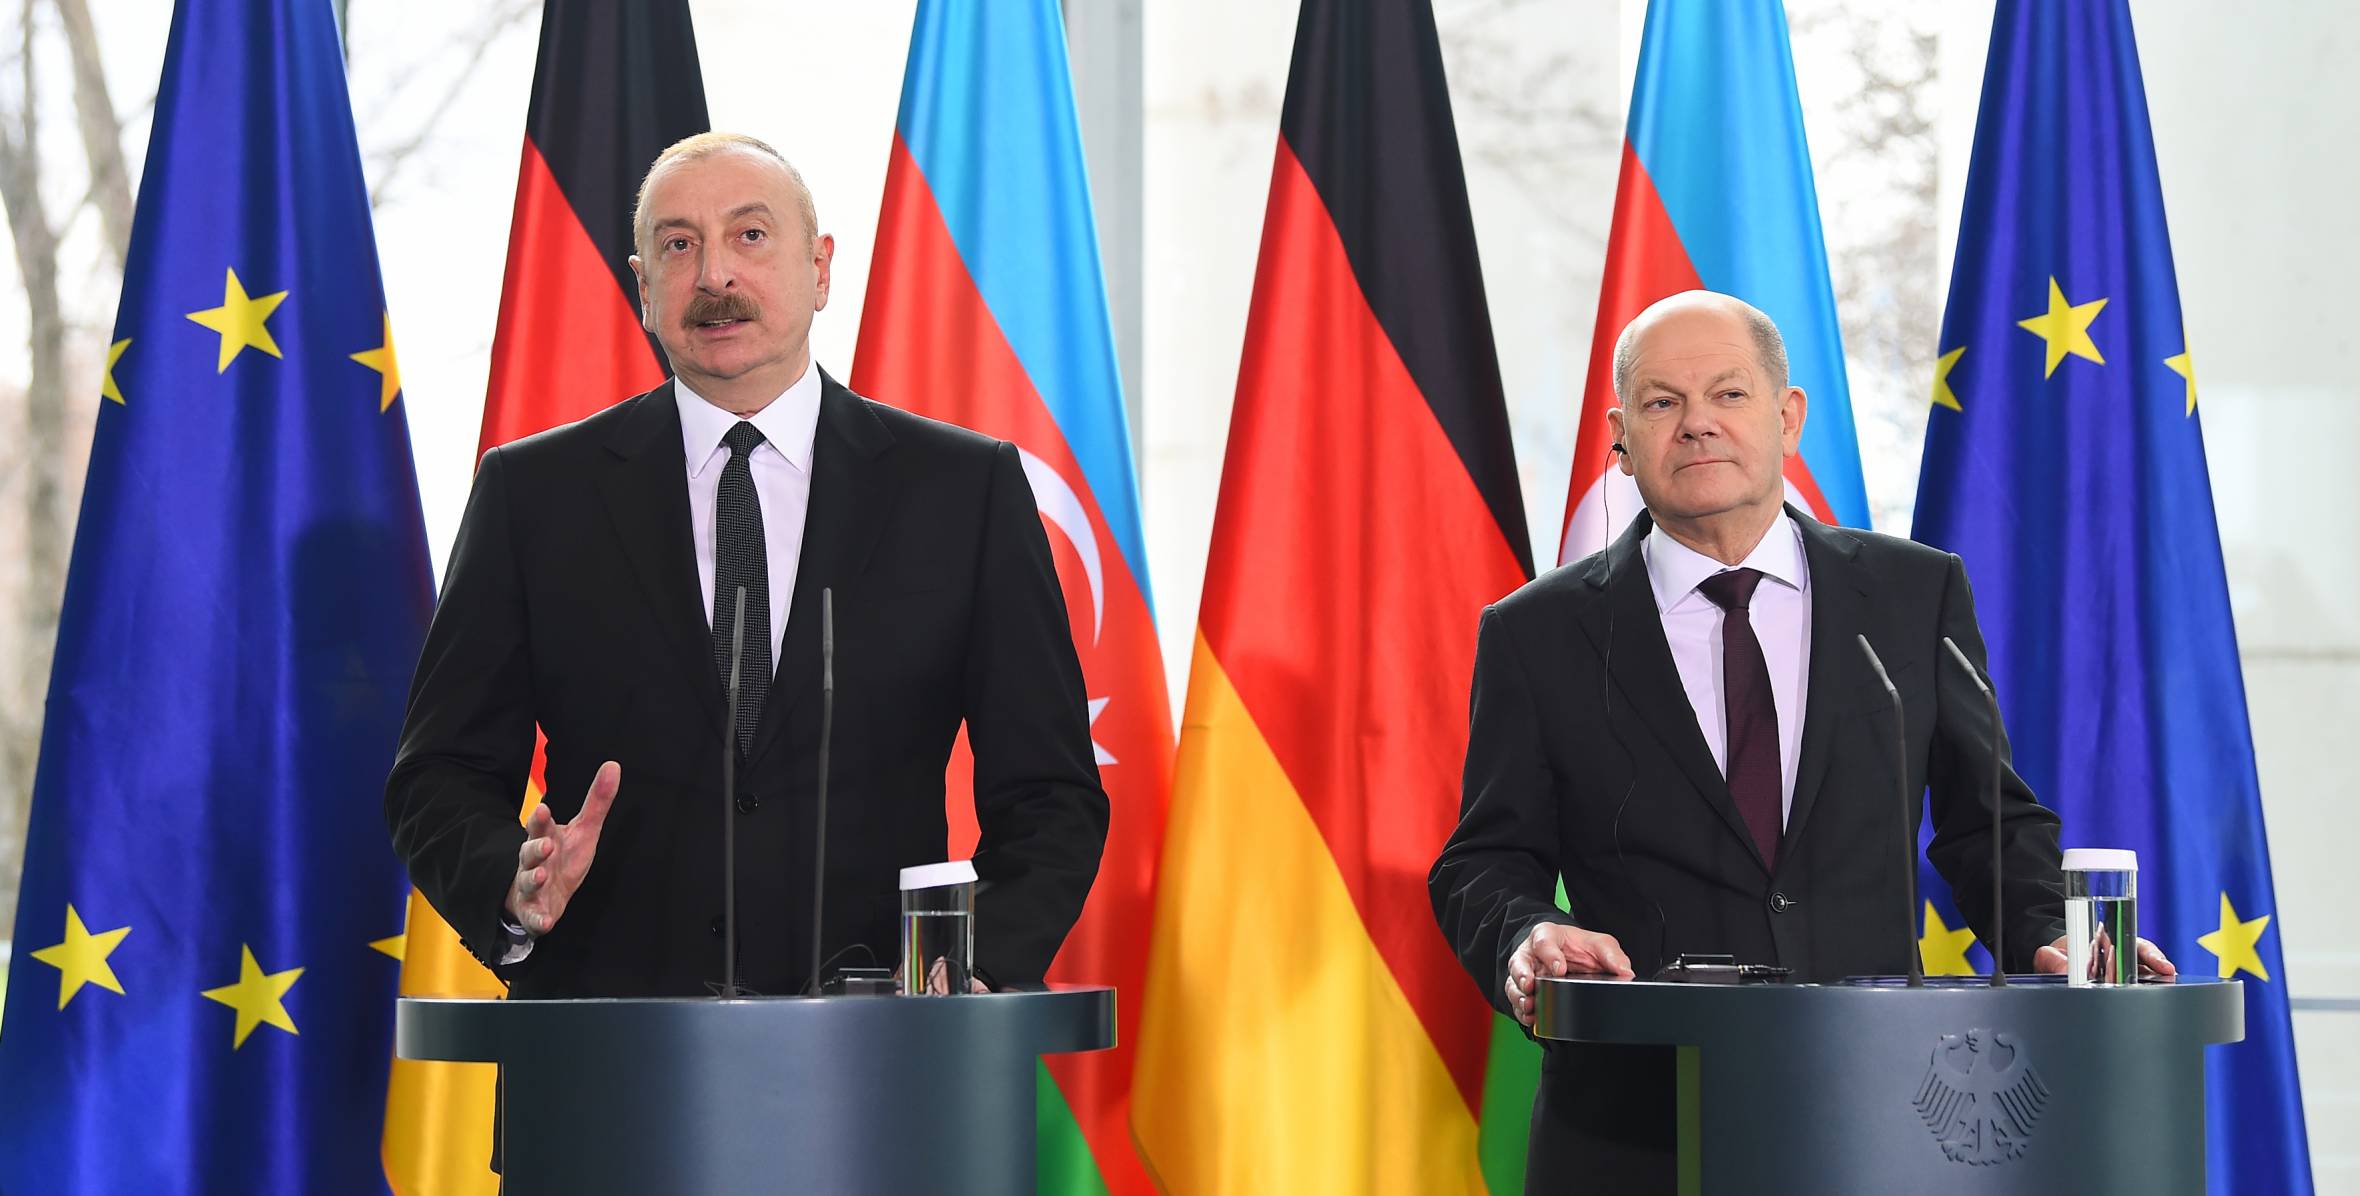 President of Azerbaijan, Chancellor of Germany held joint press conference